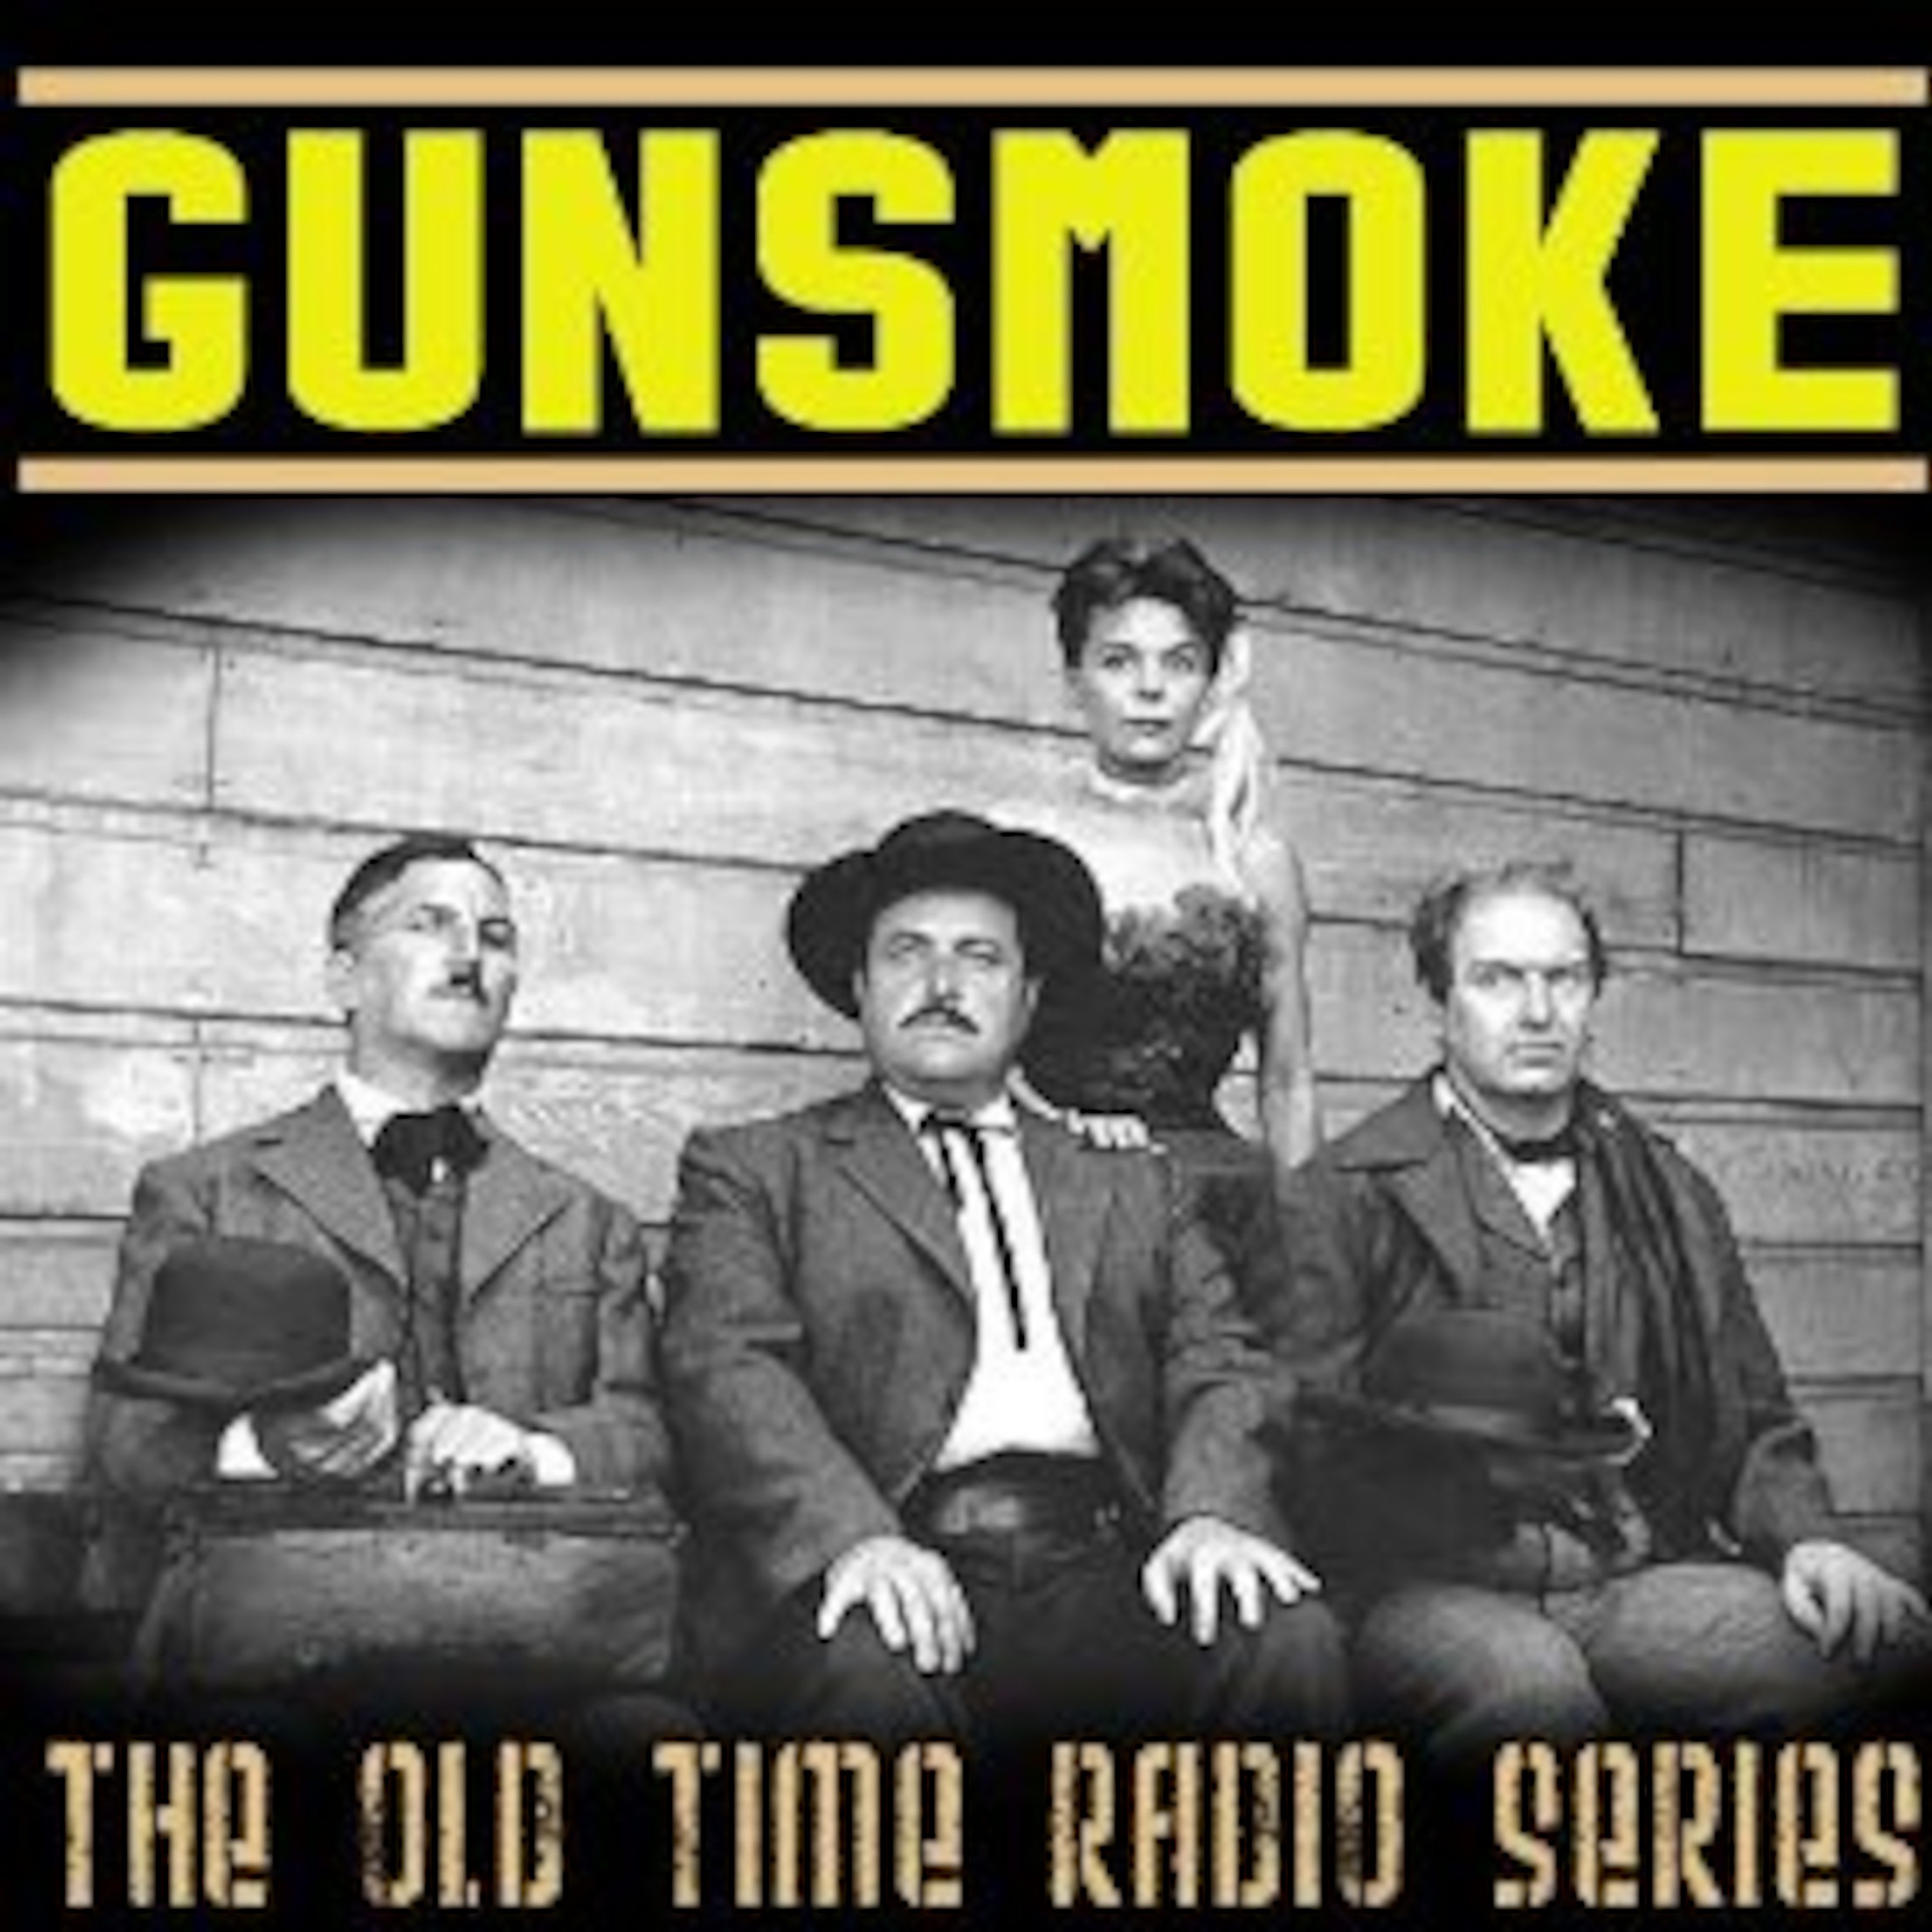 Gunsmoke: Old Time Western Drama Series, Podcasts on Audible